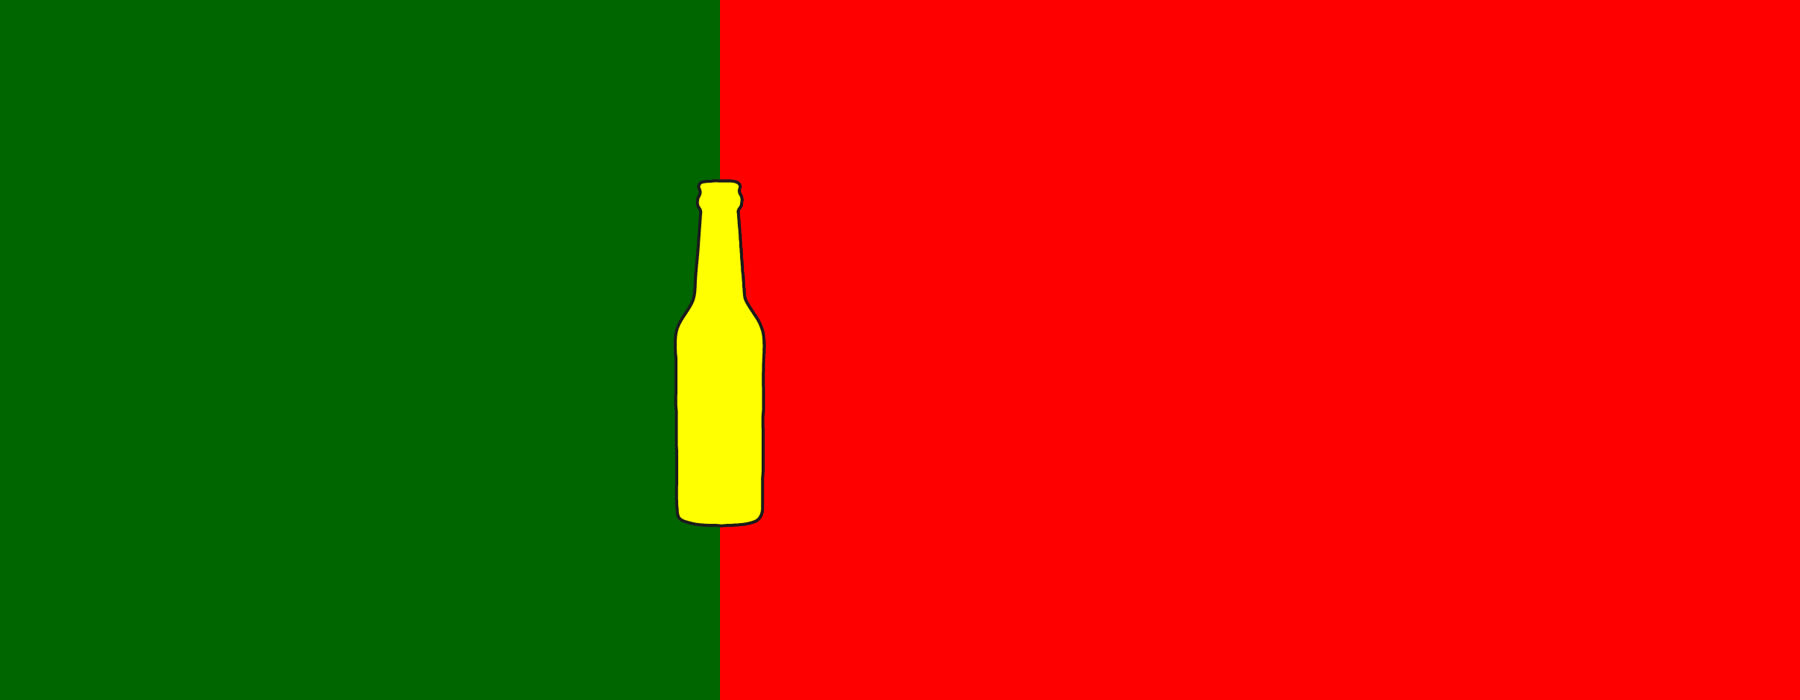 Banner Portugal Flagge